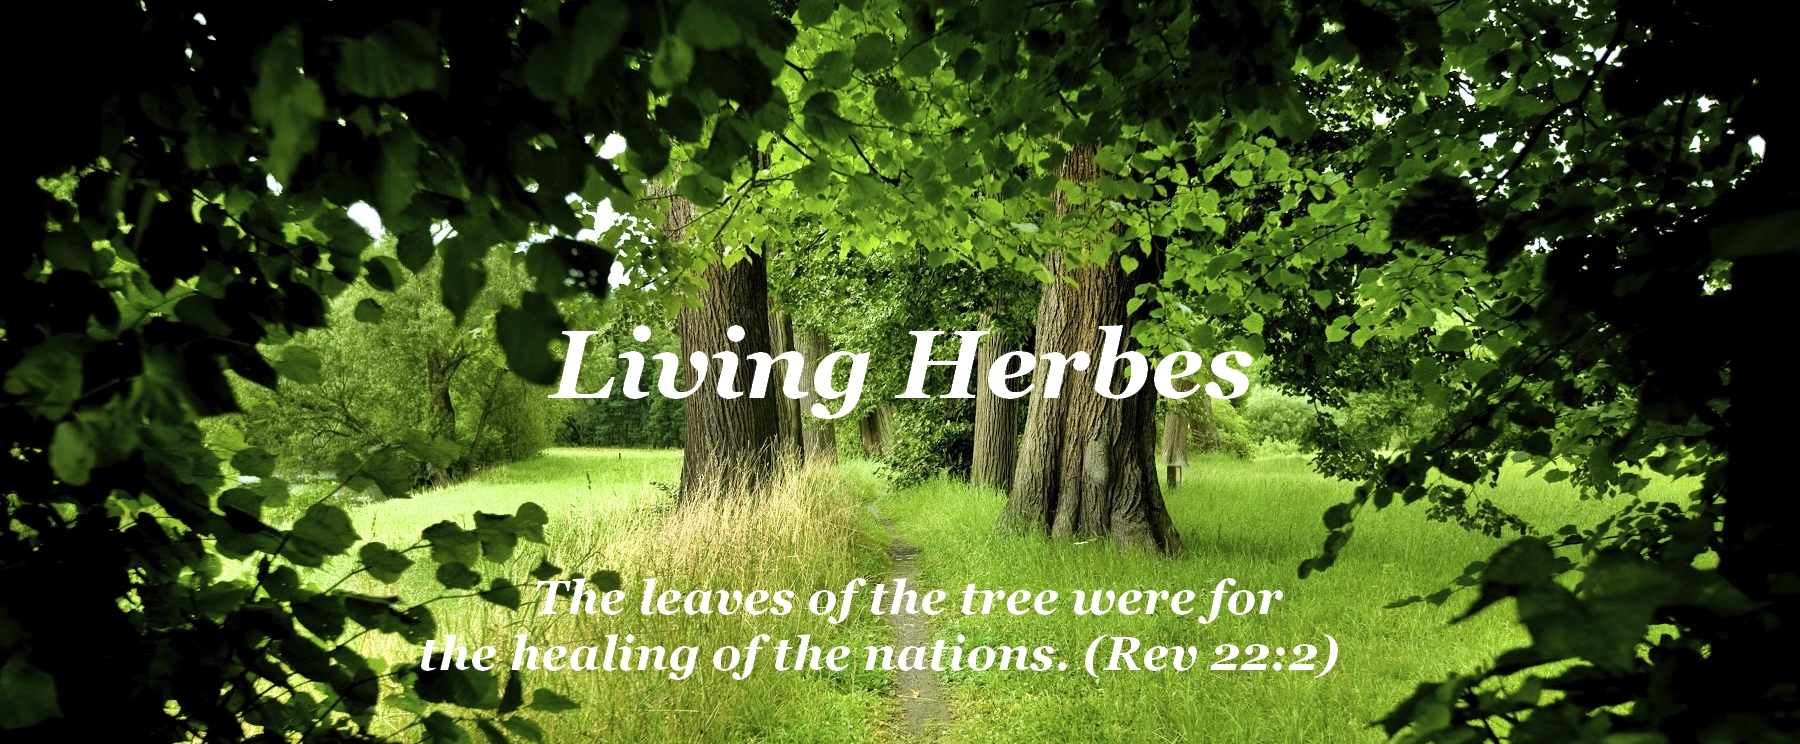 The leaves of the tree were for the healing of the nations. (Rev 22:2) Leaves of Healing, Living Herbes